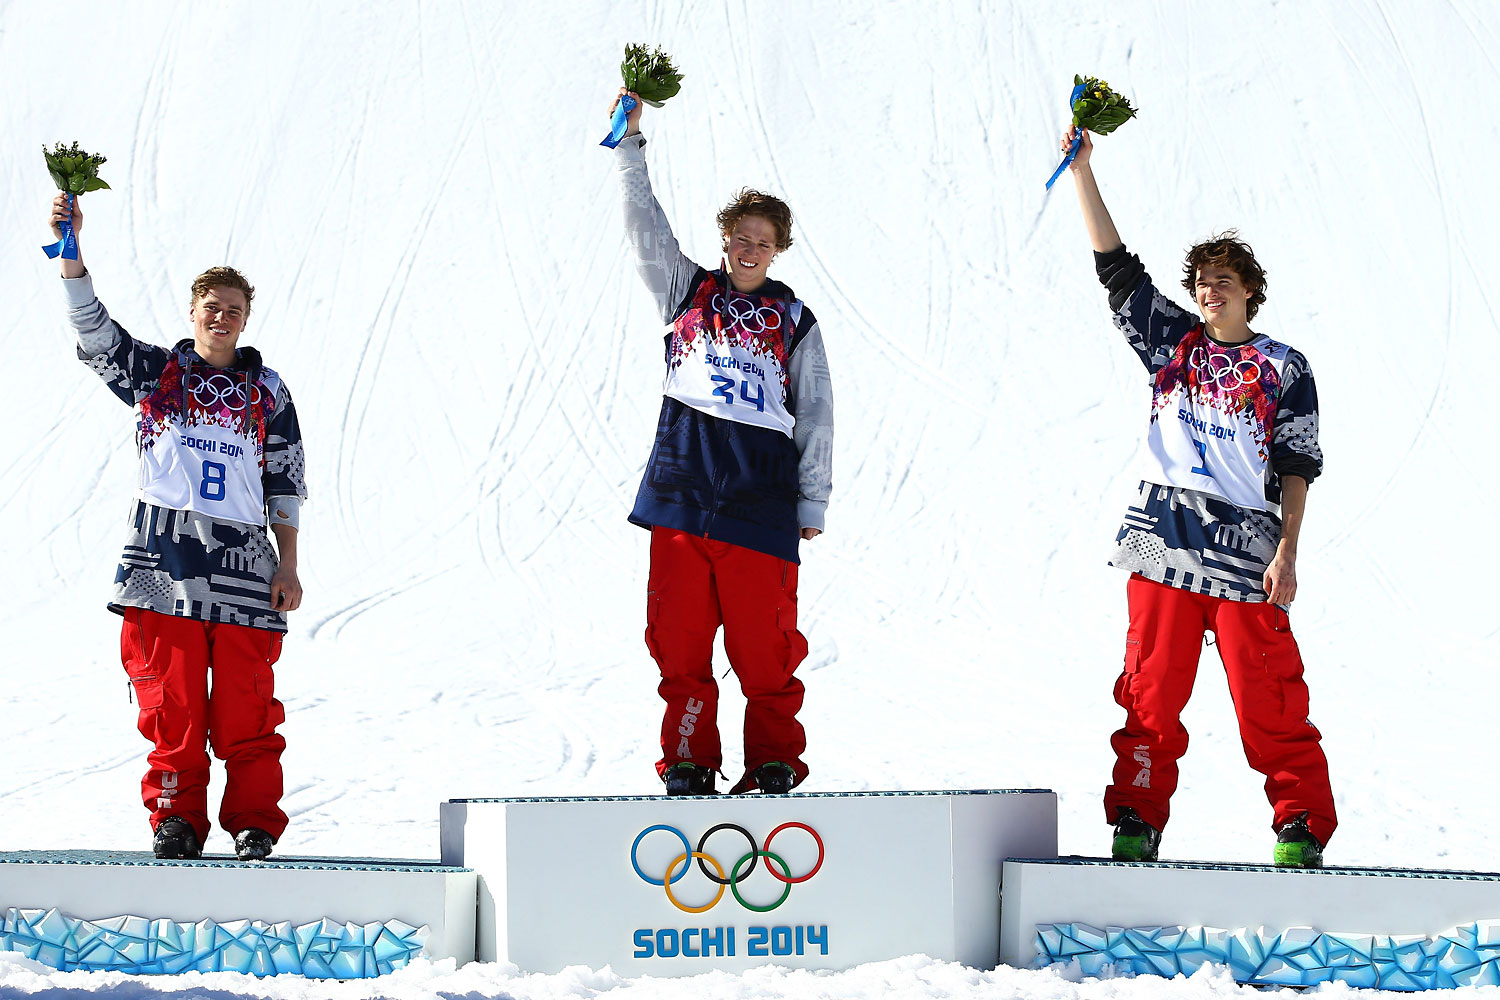 Silver medalist Gus Kenworthy of the United States, gold medalist Joss Christensen of the United States and bronze medalist Nicholas Goepper of the United States stand on the podium during the flower ceremony after the Freestyle Skiing Men's Ski Slopestyle Finals on Feb. 13, 2014 in Sochi. (Al Bello—Getty Images)